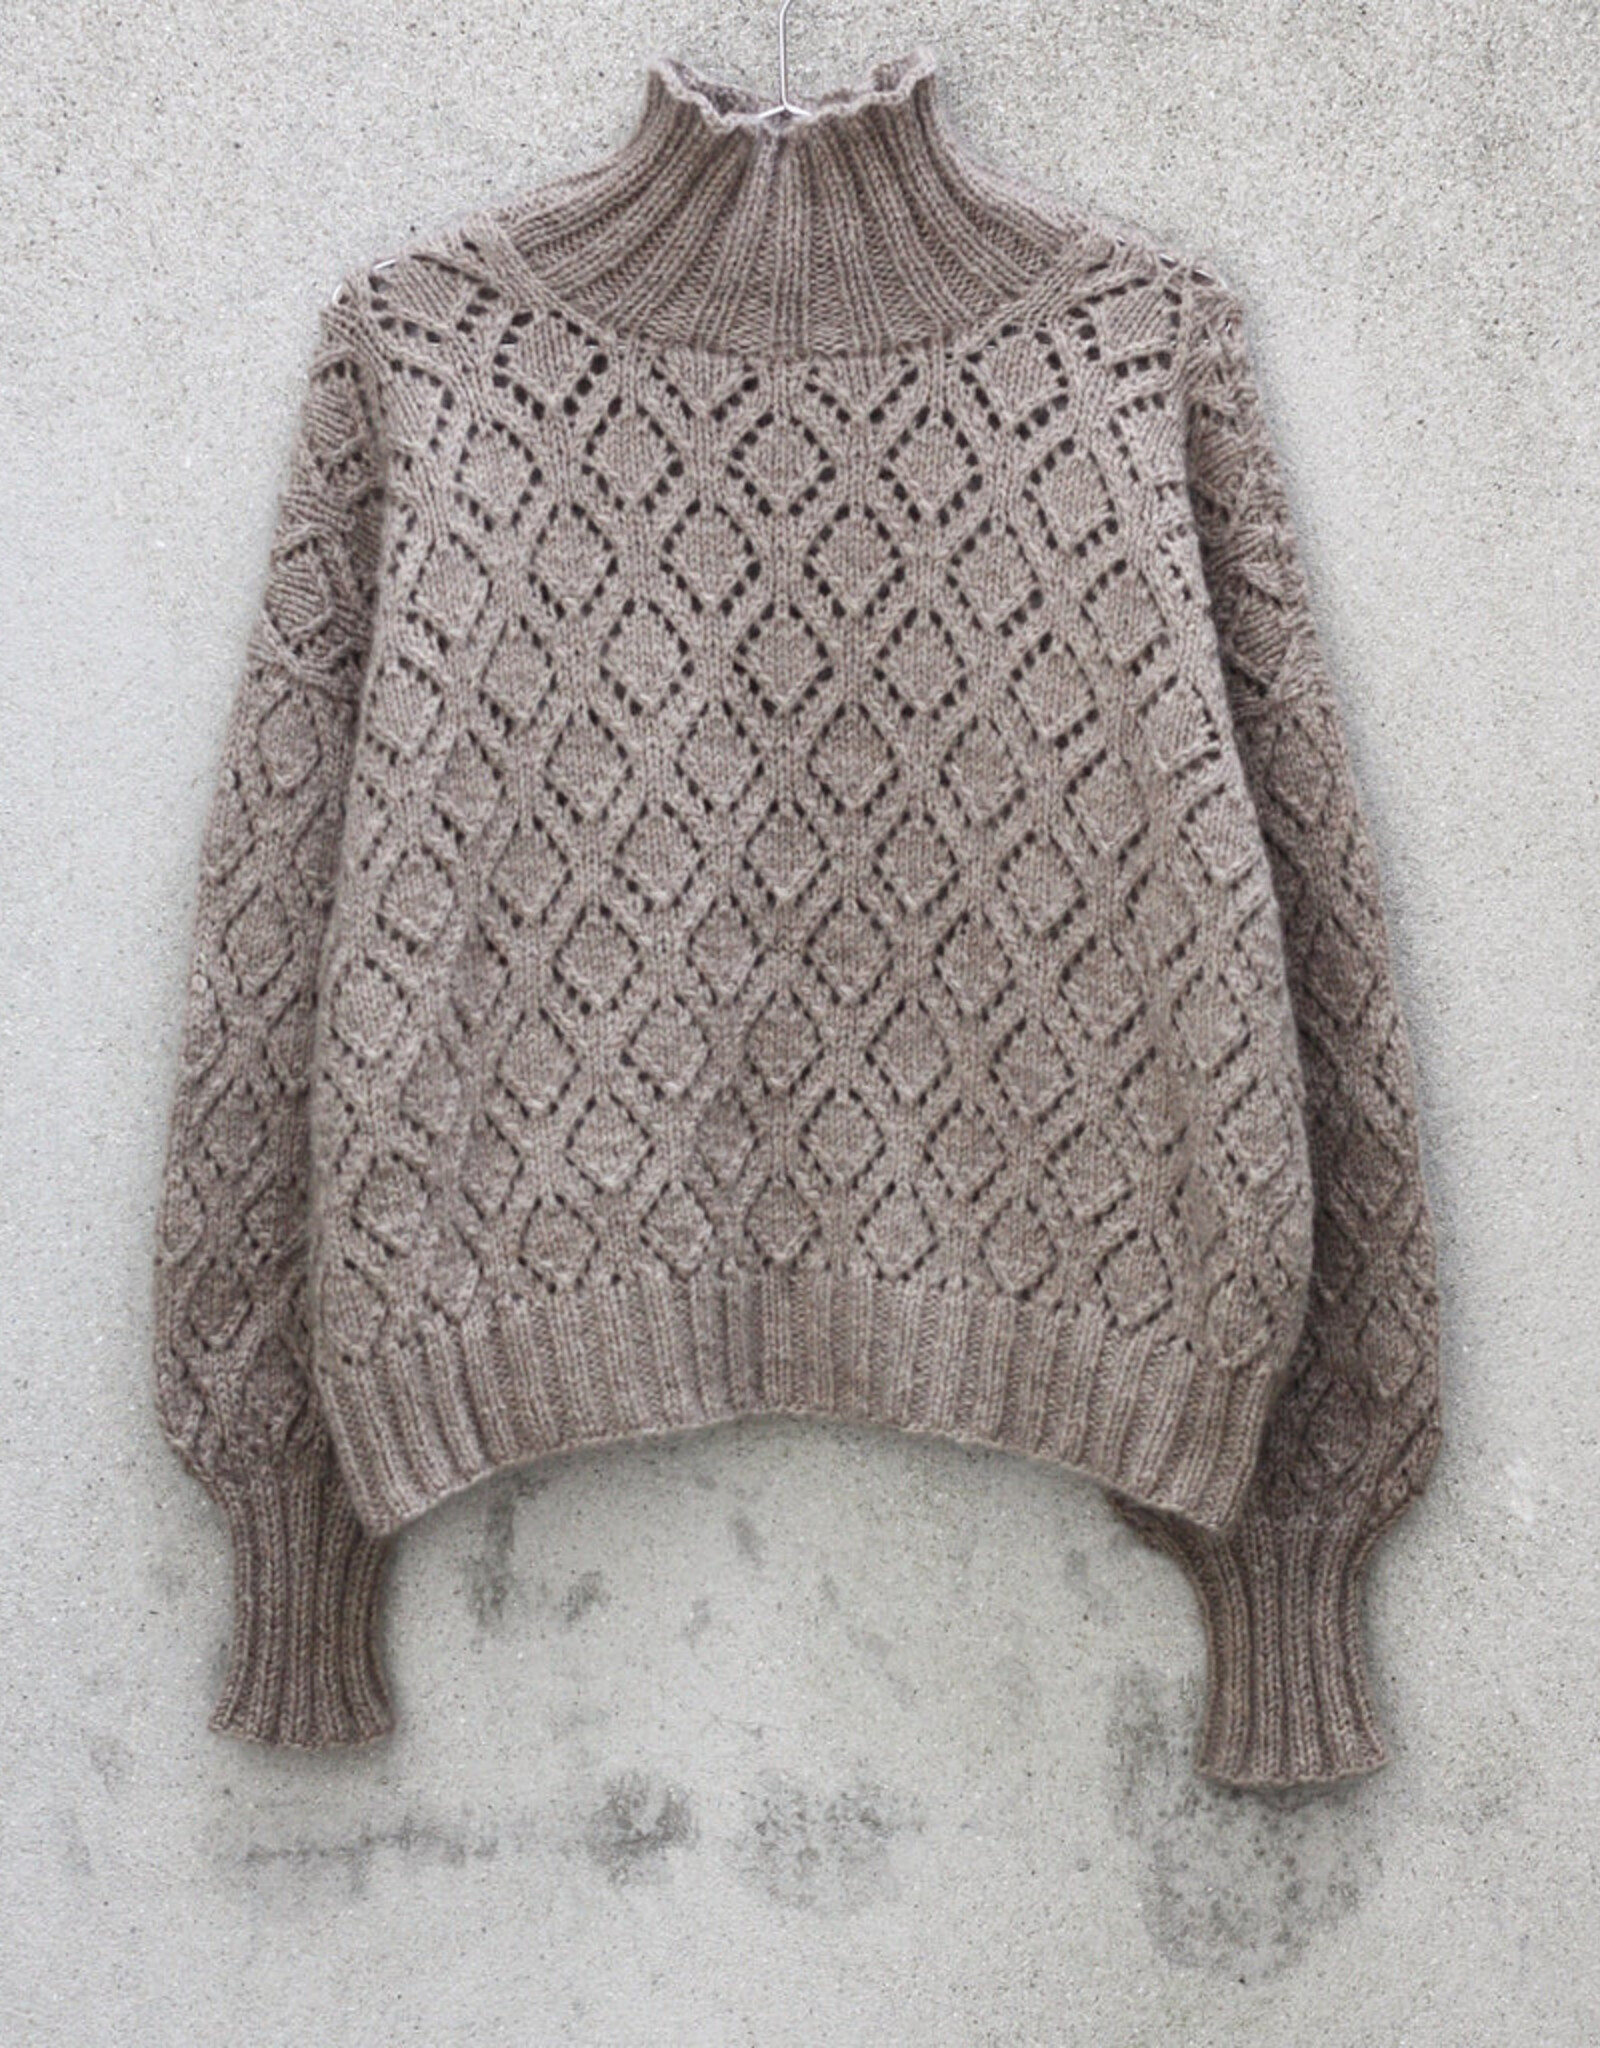 Knitting for Olive - Timeless knitting patterns and sustainable yarn –